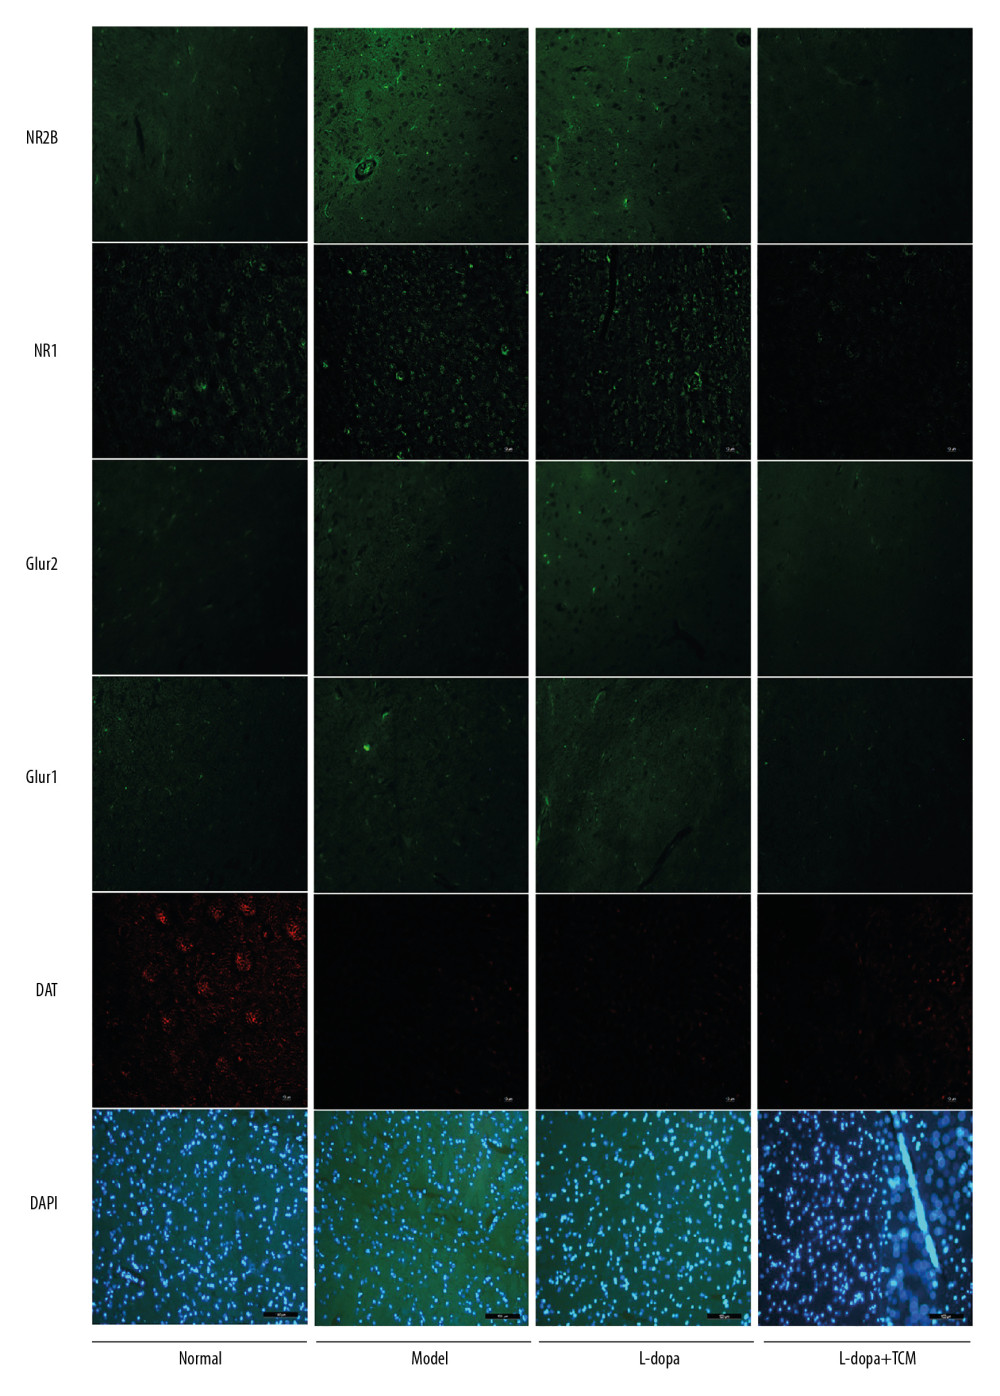 Immunofluorescence pictures showed that levodopa combined with Bushen Zhichan recipe protected the DAT cells and reduced the expressions of excitatory amino acid receptors. The scale of the pictures is 100 microns, and the magnification is 400 times.